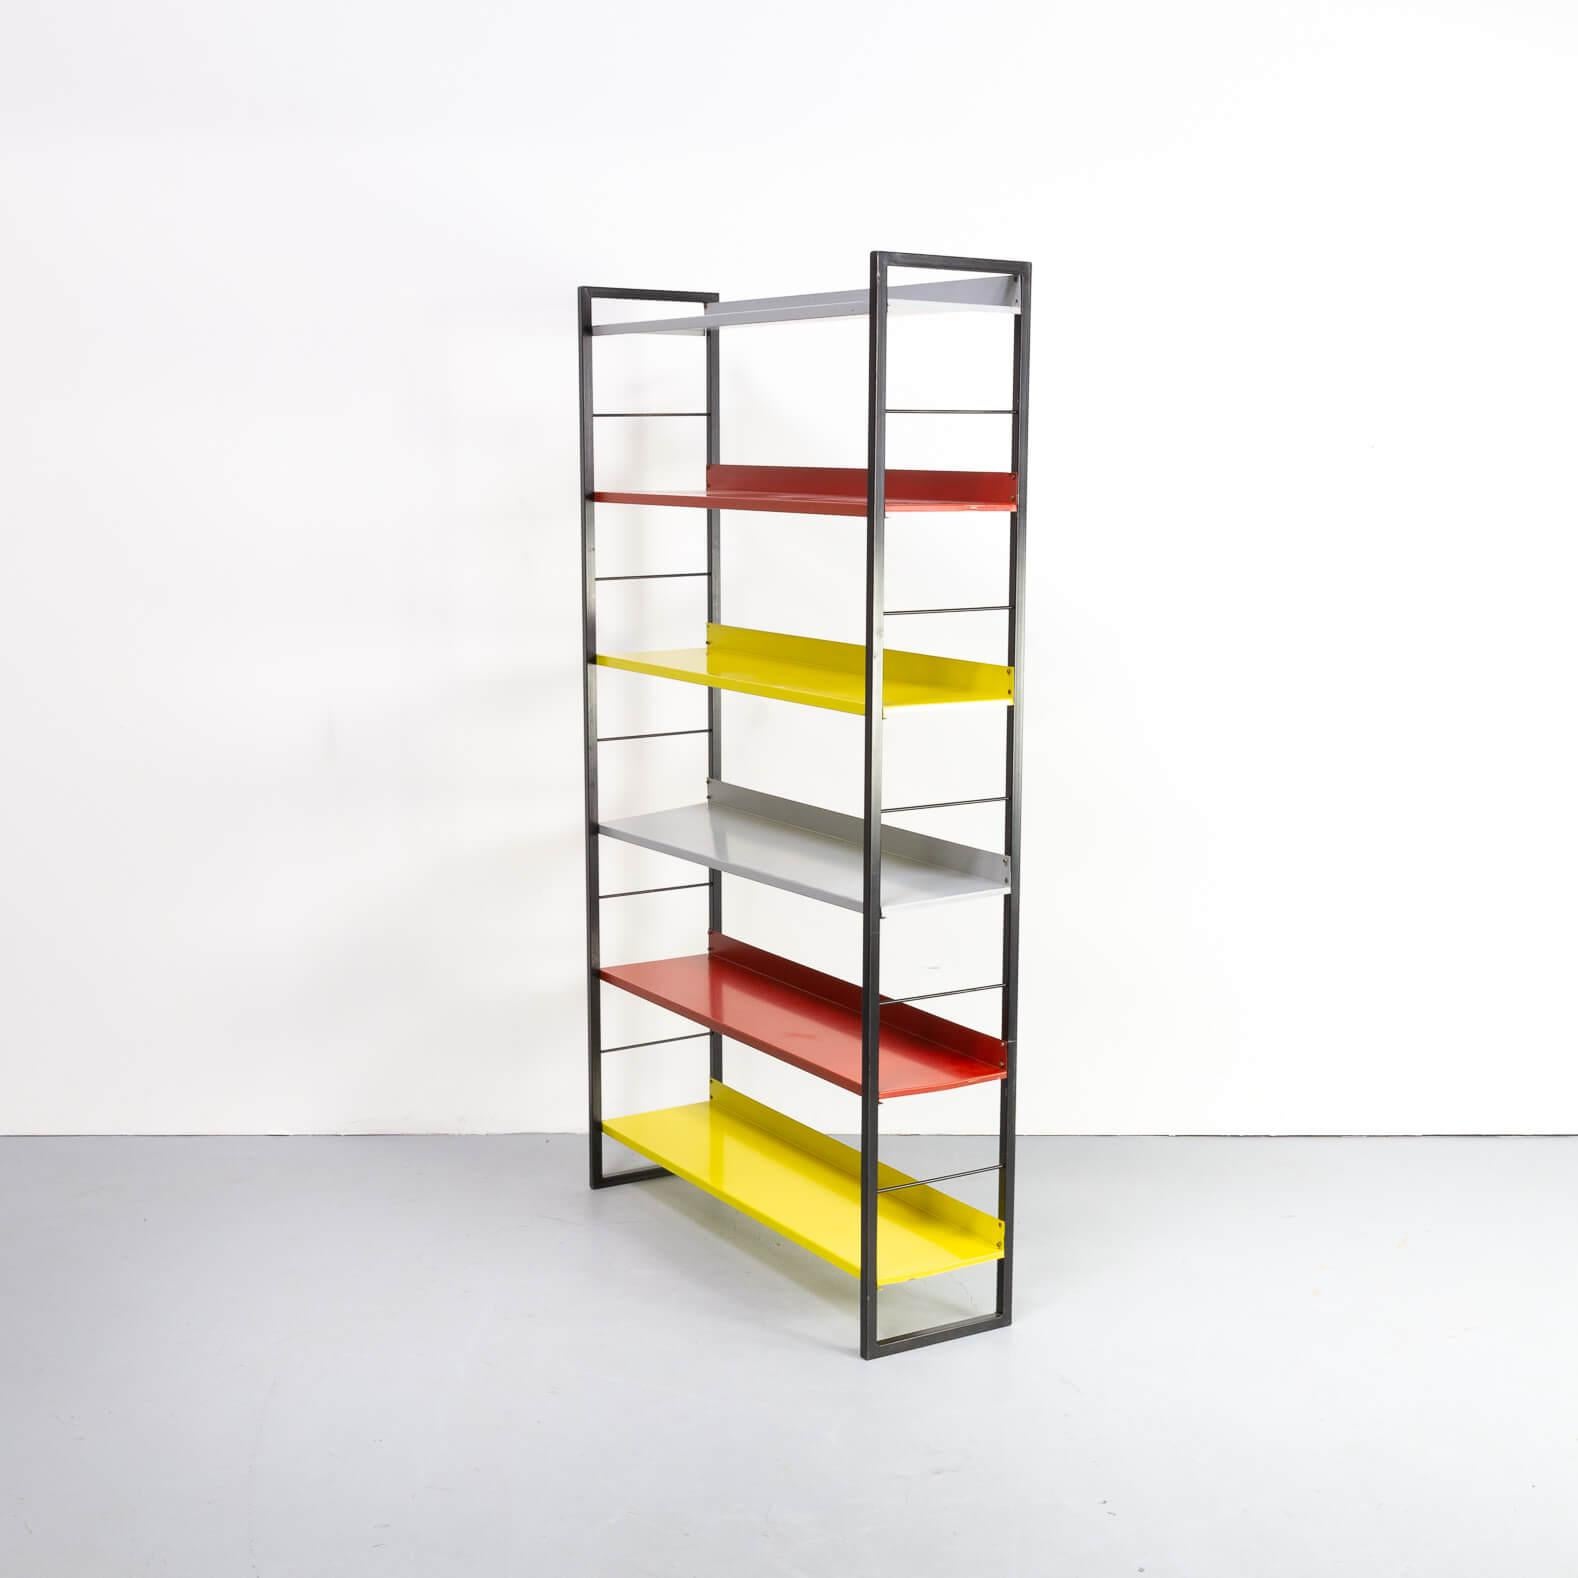 A. D. Dekker: The designer is best known for a series of colorful, adjustable shelving units produced by Dutch brand Tomado.
The colorful shelves of Dekker’s design, which call to mind the primary colors of Gerrit Rietveld’s red and blue chair